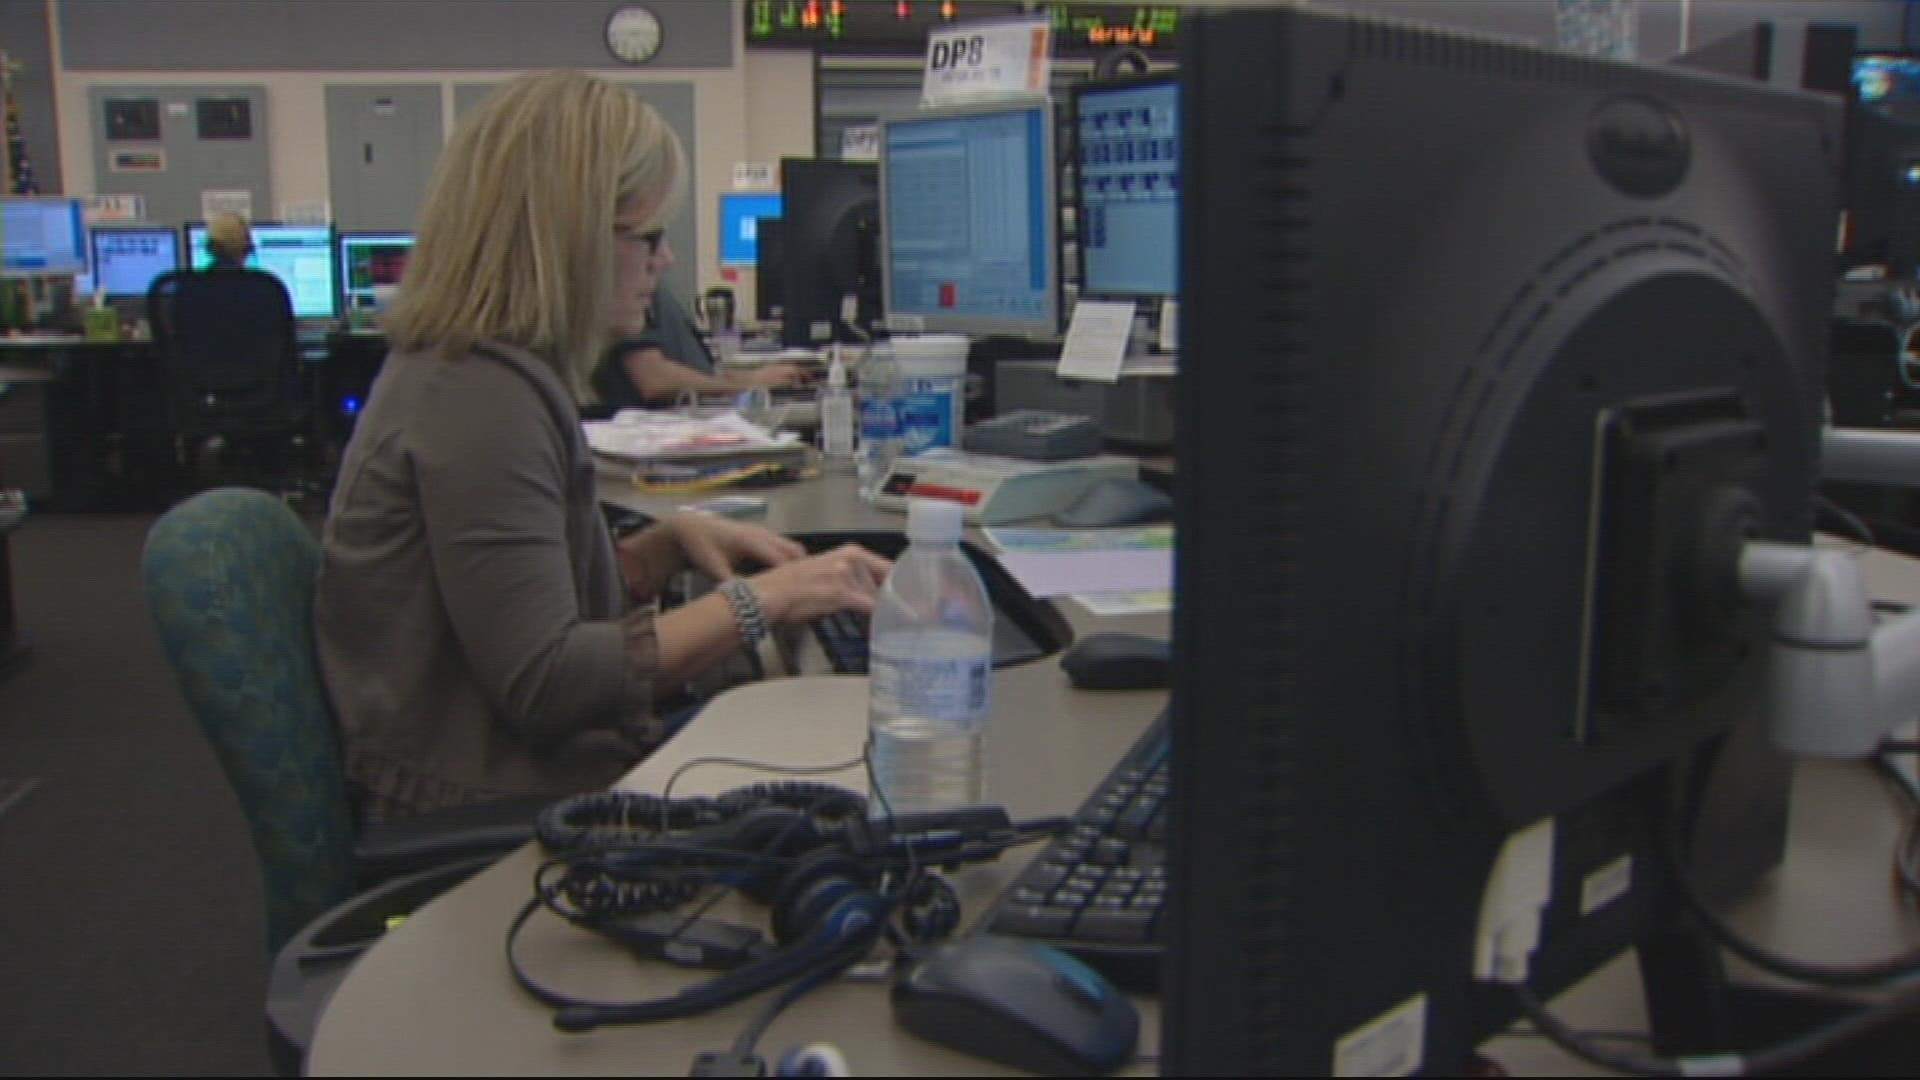 The Bureau of Emergency Communications has lost a few dozen dispatchers over the last few years, and the call volume has only been getting higher.